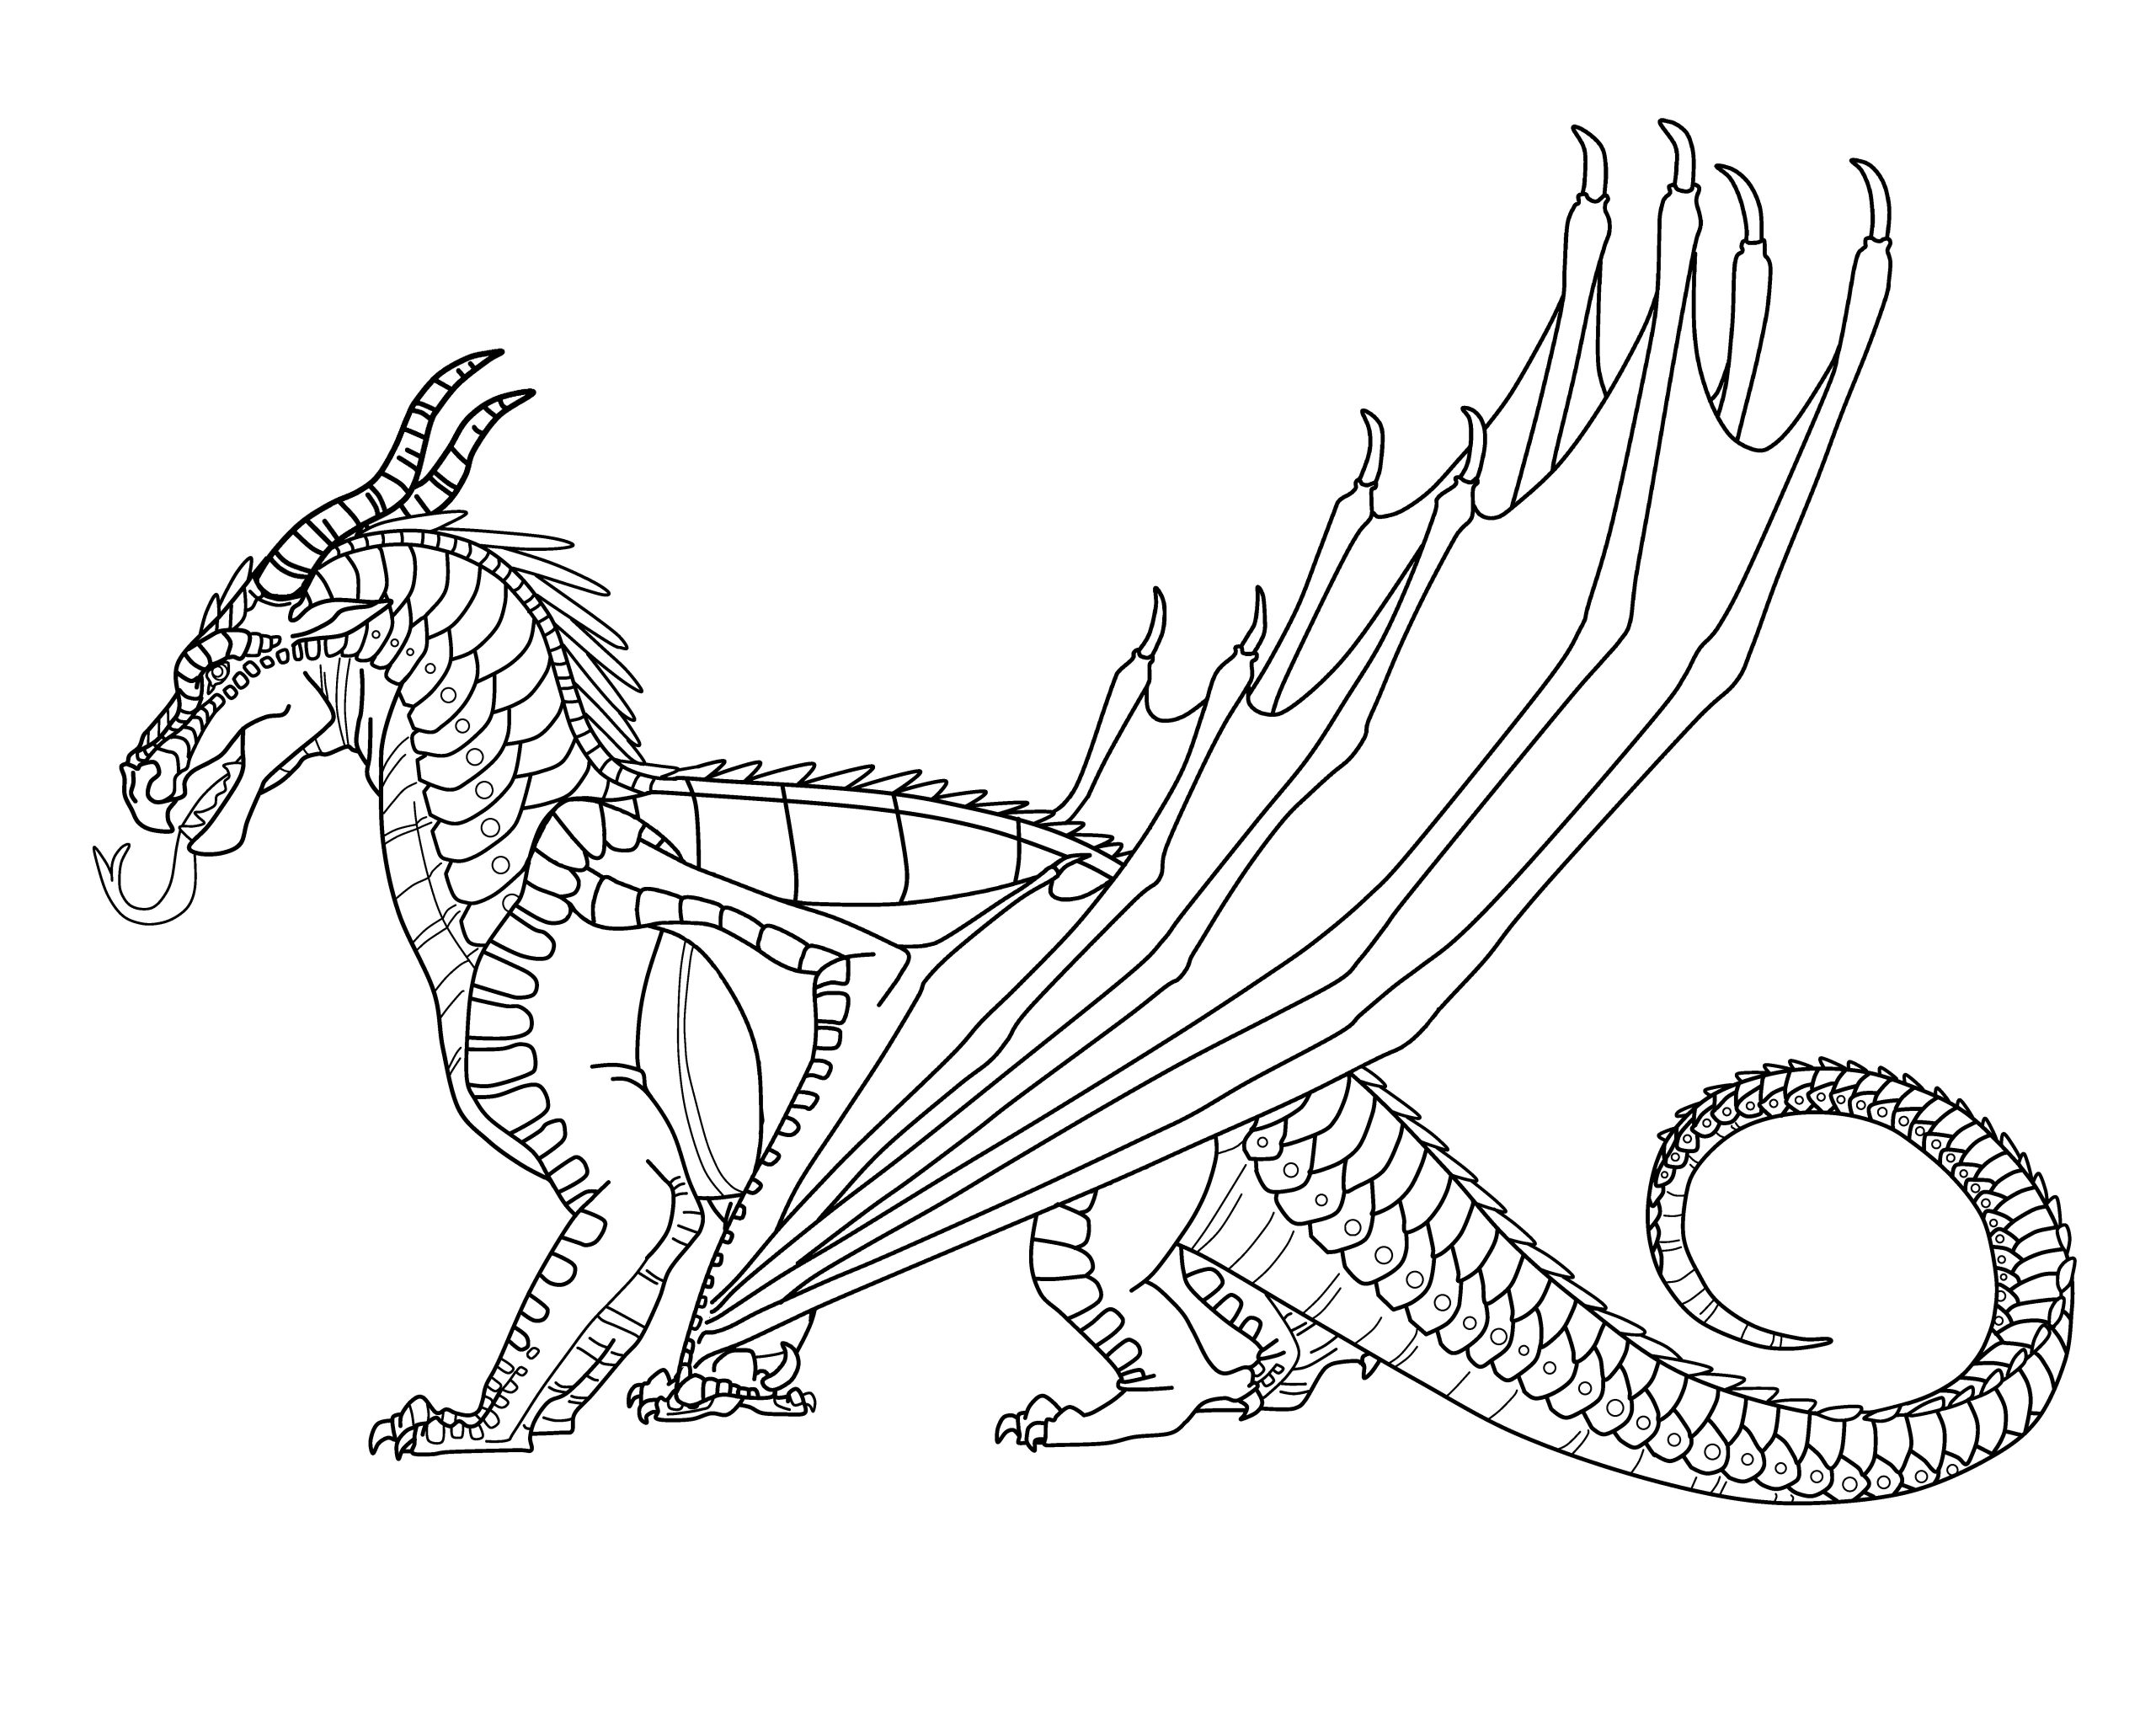 Amazing Wings Of Fire Coloring Pages Pictures To Download -  Whitesbelfast.com